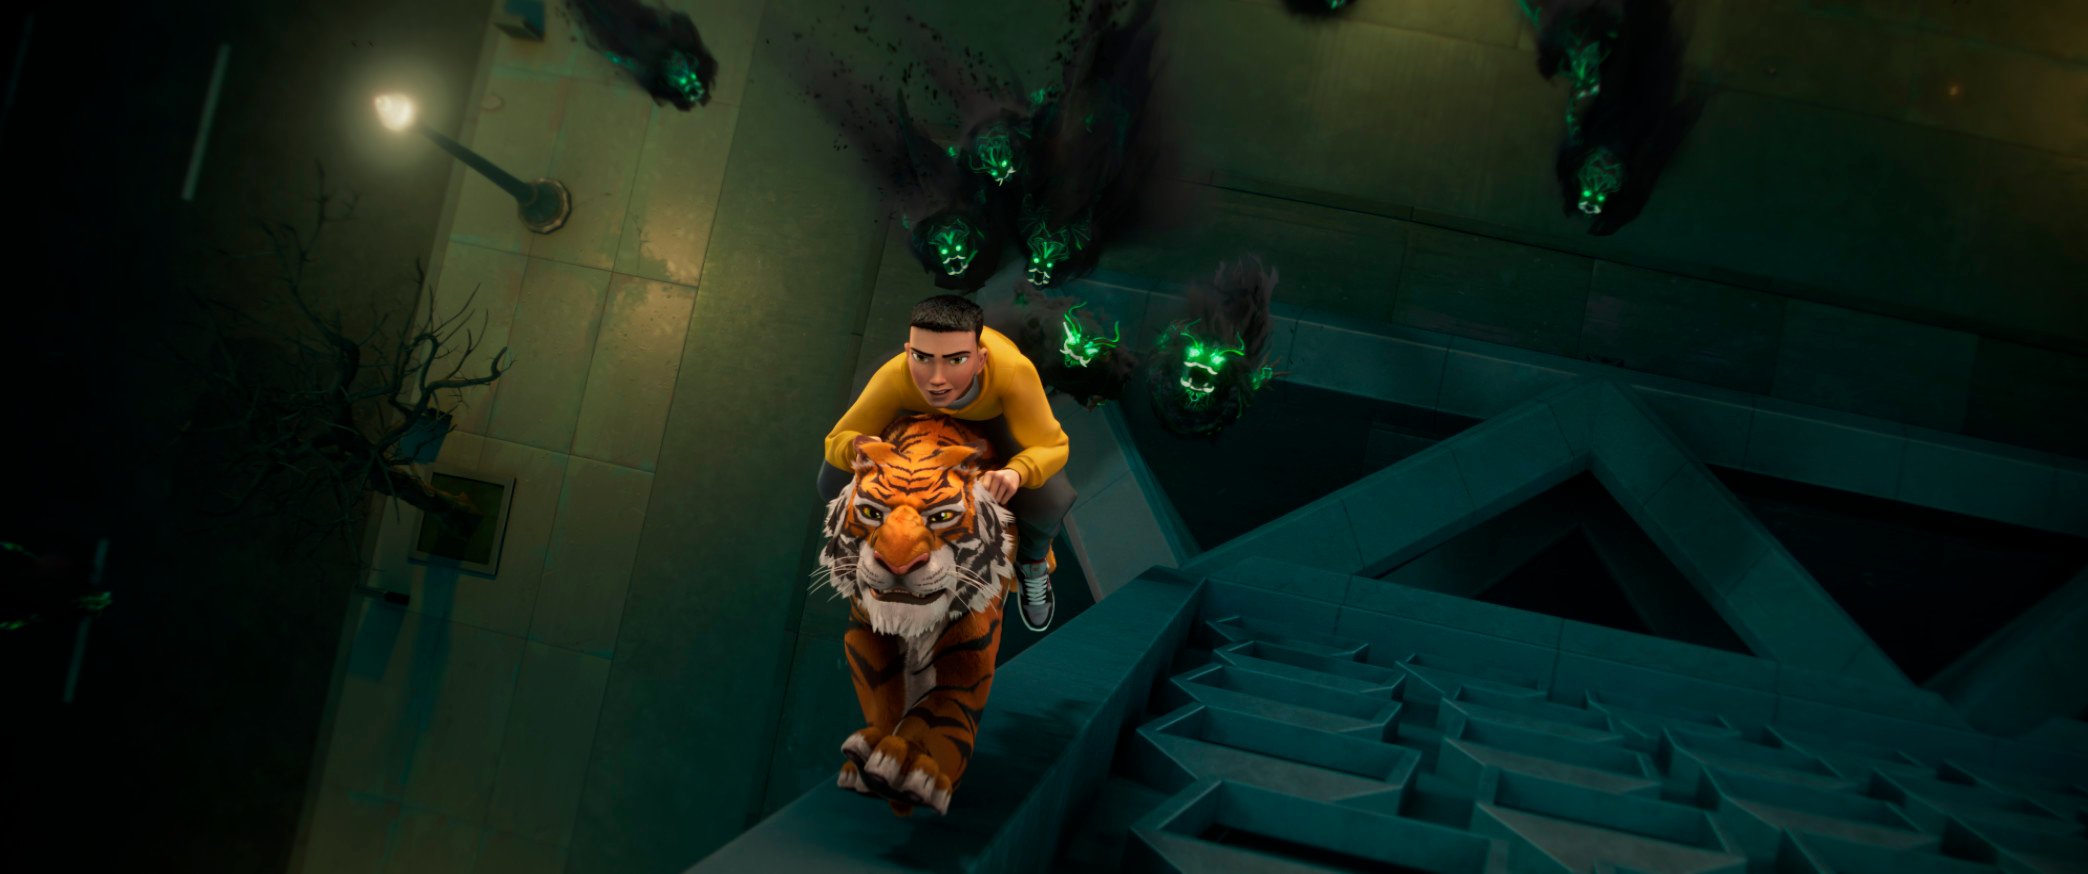 Tom (voiced by Brandon Soo Hoo) and Mr Hu the tiger (Henry Golding) in a still from “The Tiger’s Apprentice”, a new fantasy animation directed by Raman Hui and co-starring the voice of Michelle Yeoh. Photo: Paramount Pictures/Paramount+